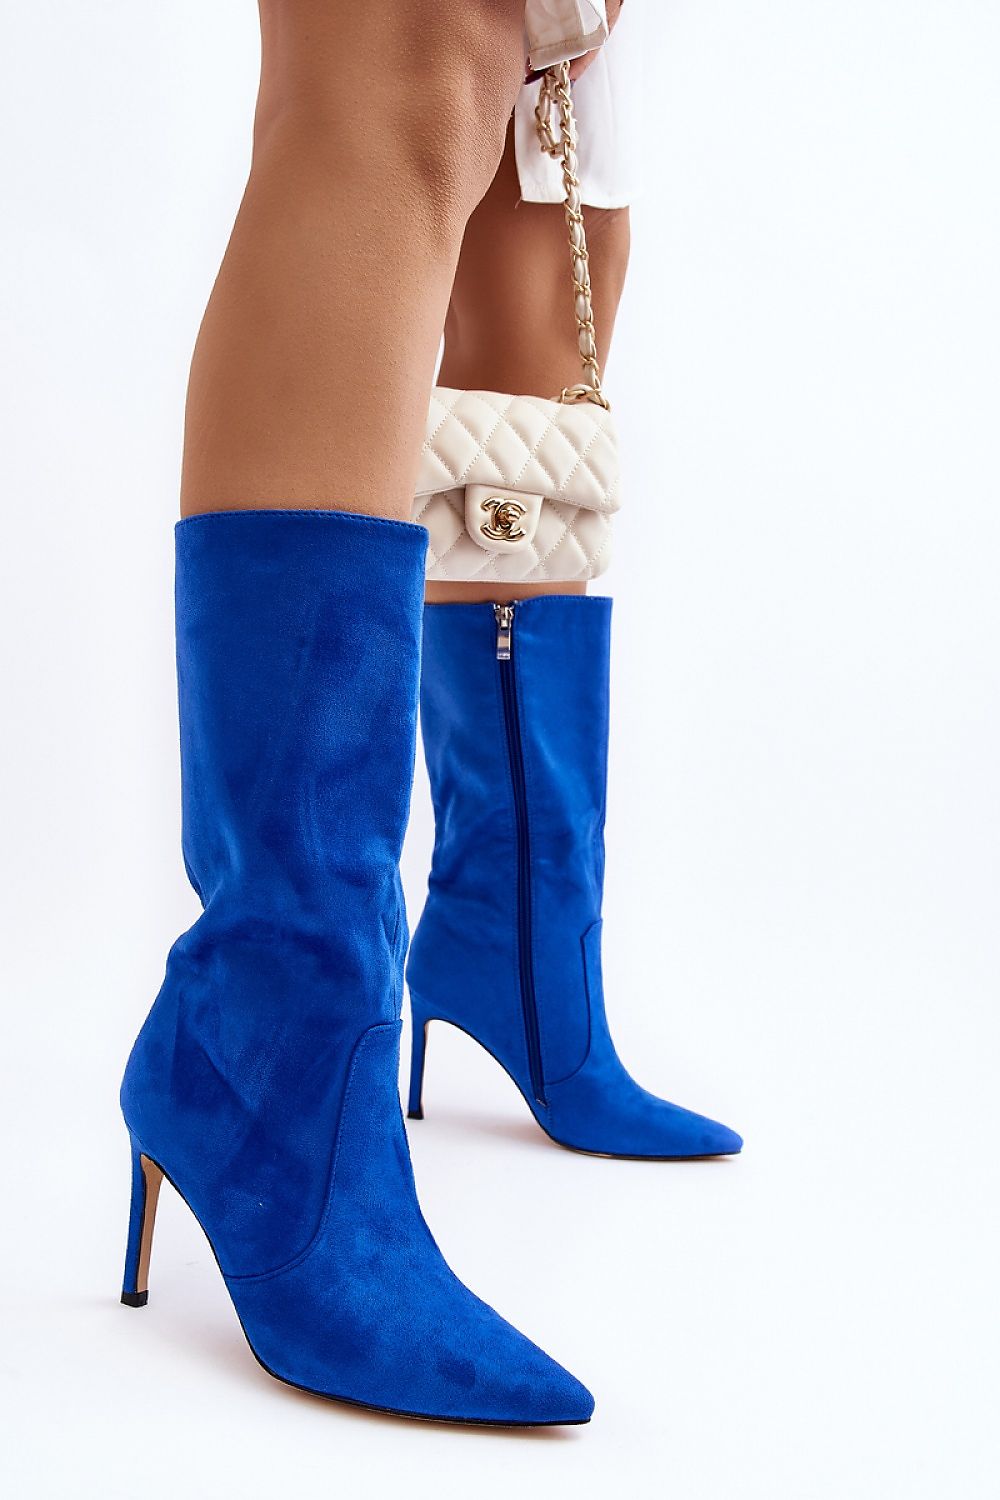 Women's Step in Style Blue High Heel Boots